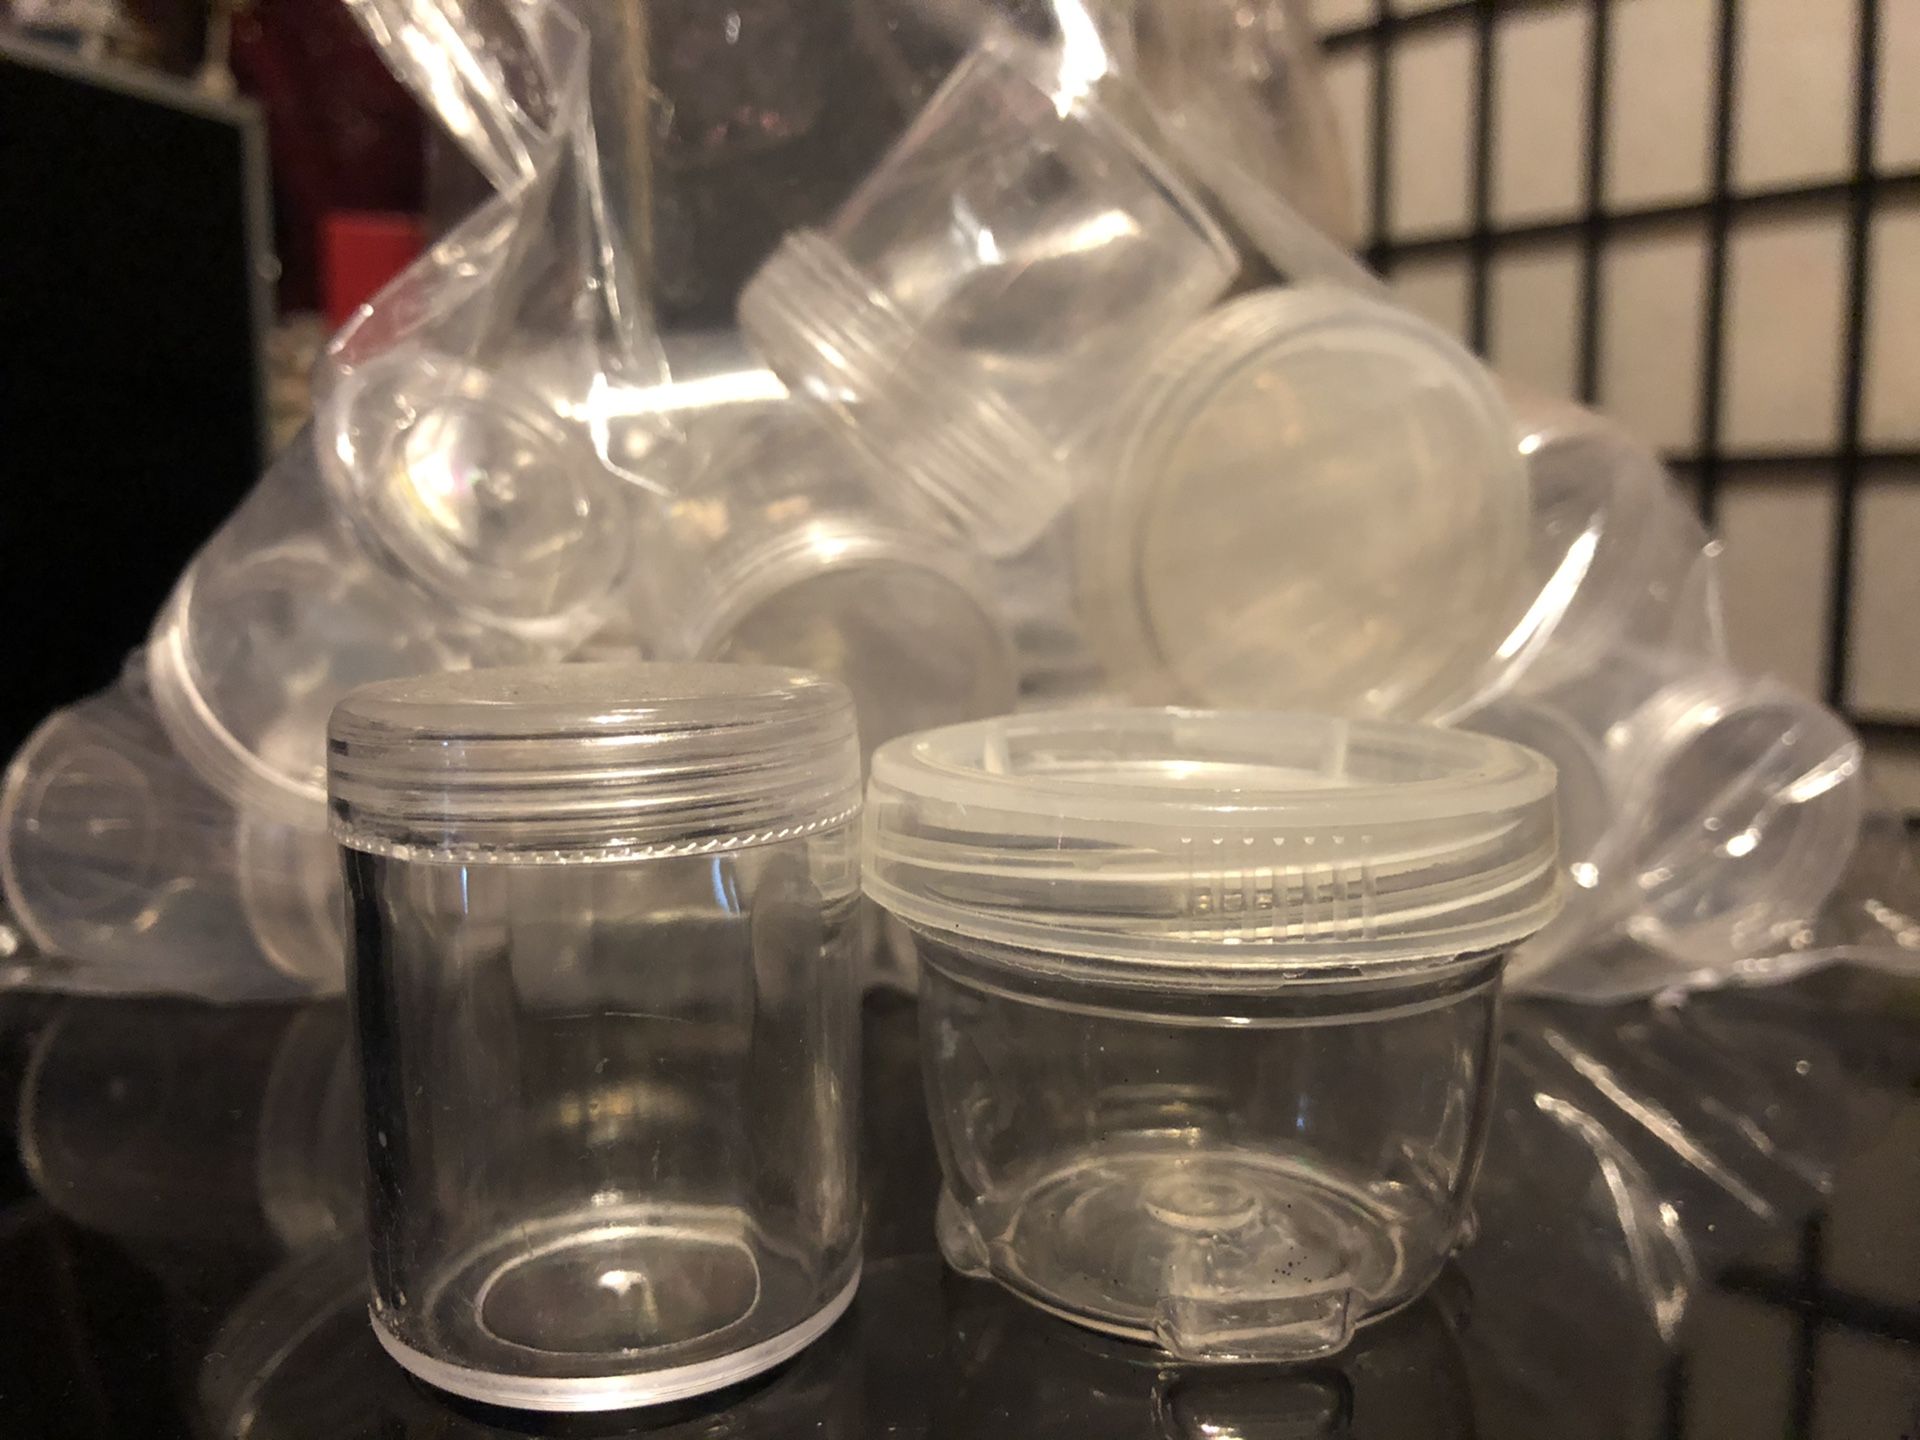 Clear containers for slime or storage